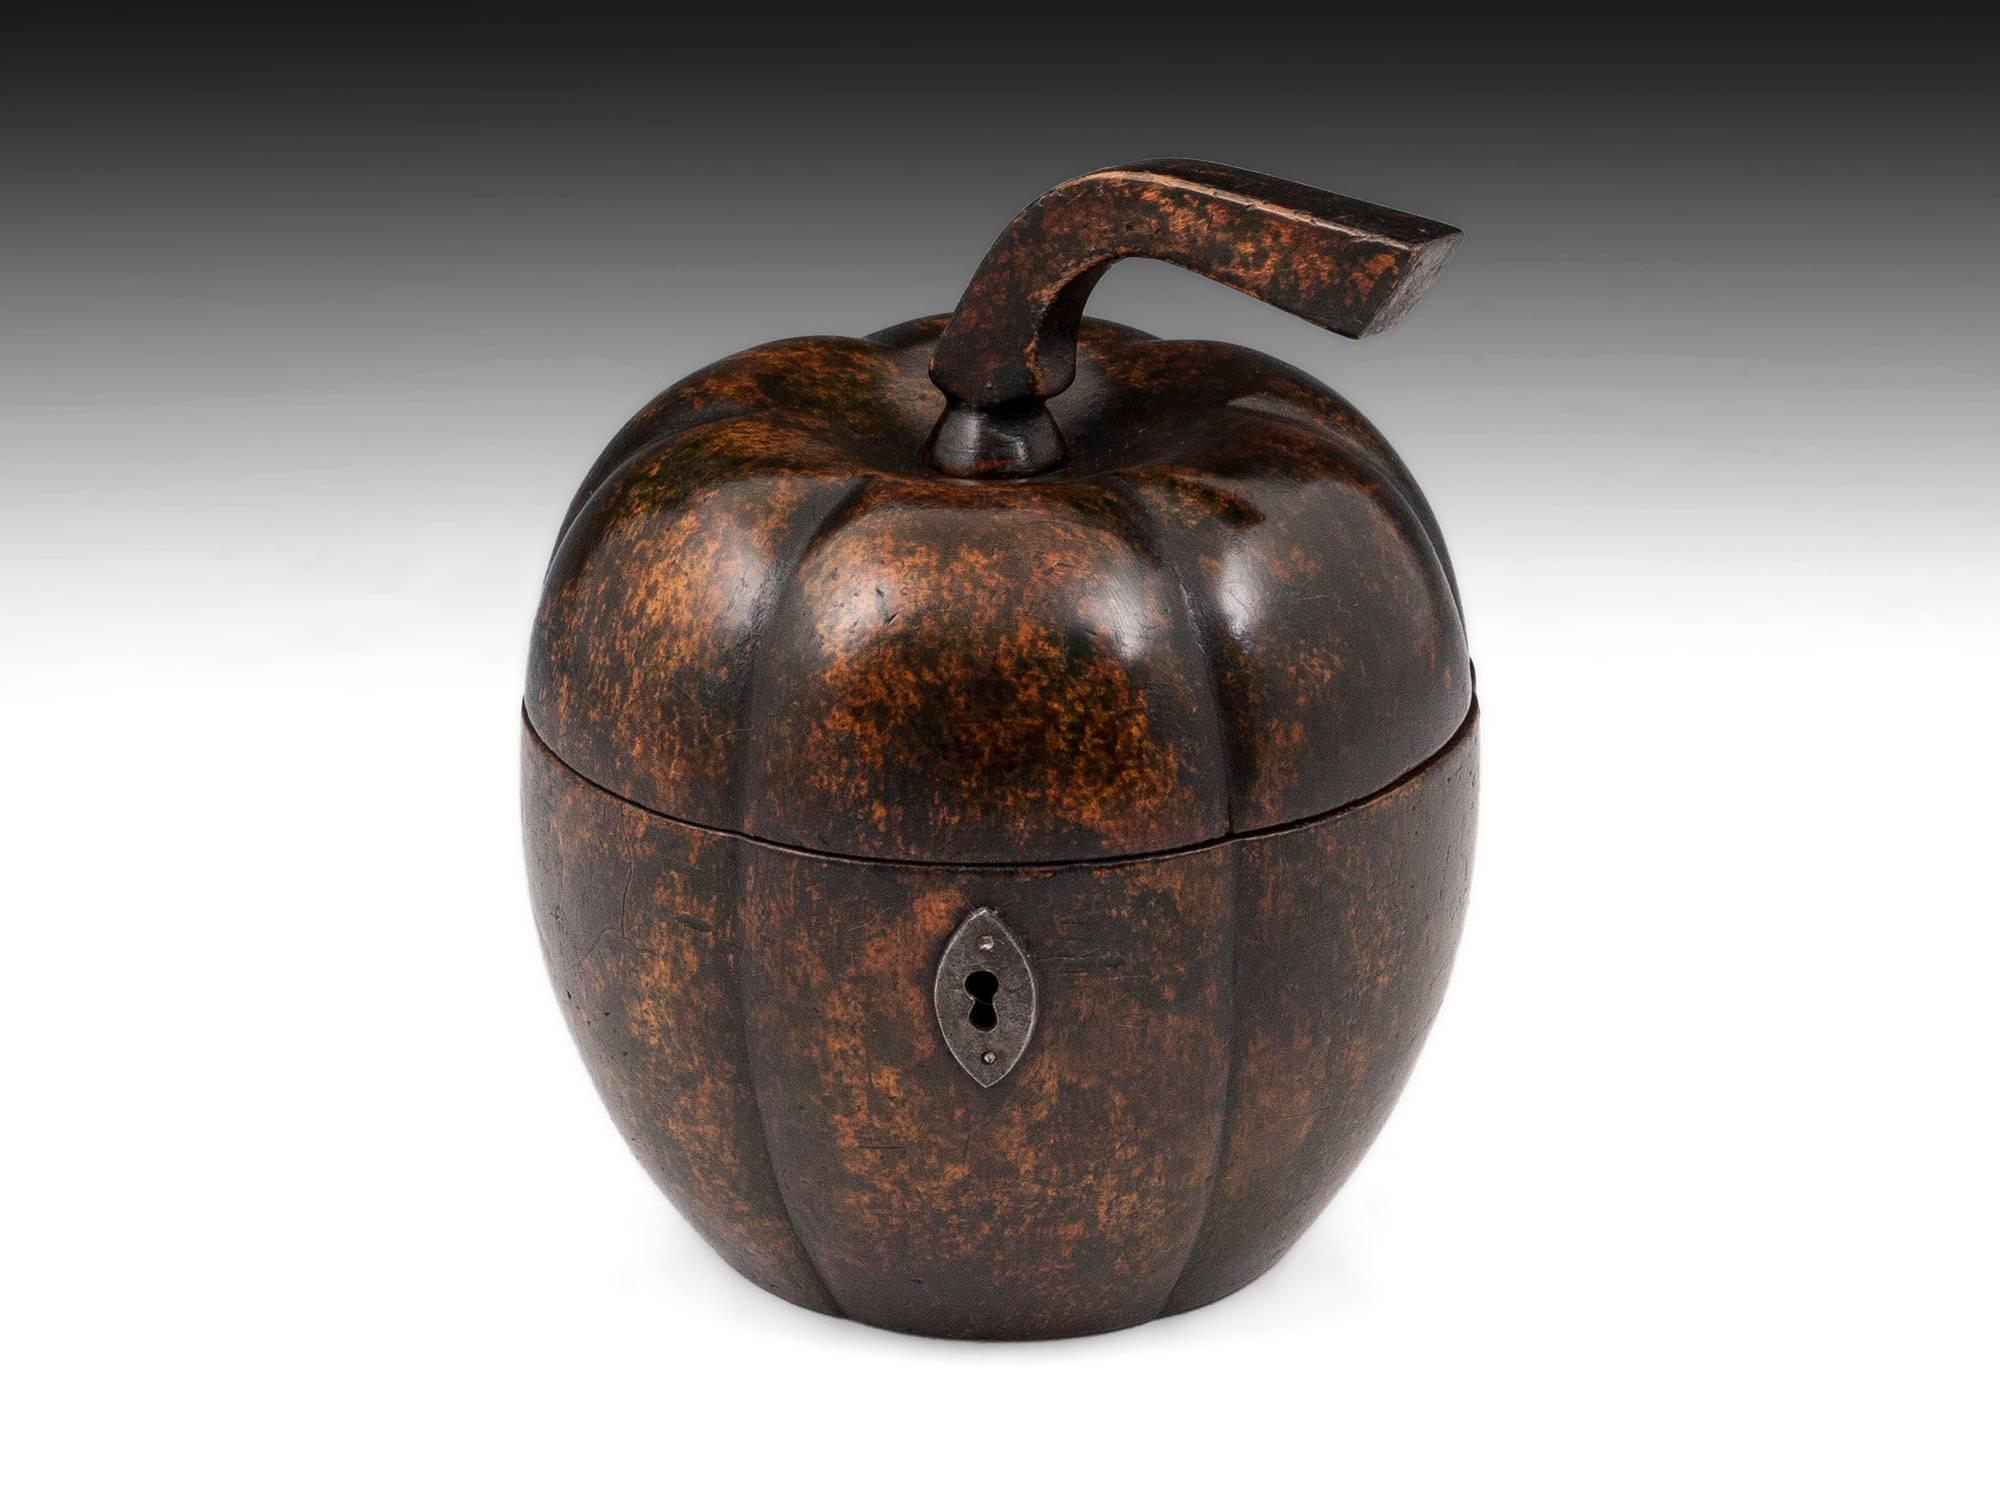 (This tea caddy is currently on display at  “A Tea Journey: from Mountain to the Table” at Compton Verney until the 22nd september.)
Extremely rare squash tea caddy with a beautiful dark mottled color, lovely patination, and has a wonderful original